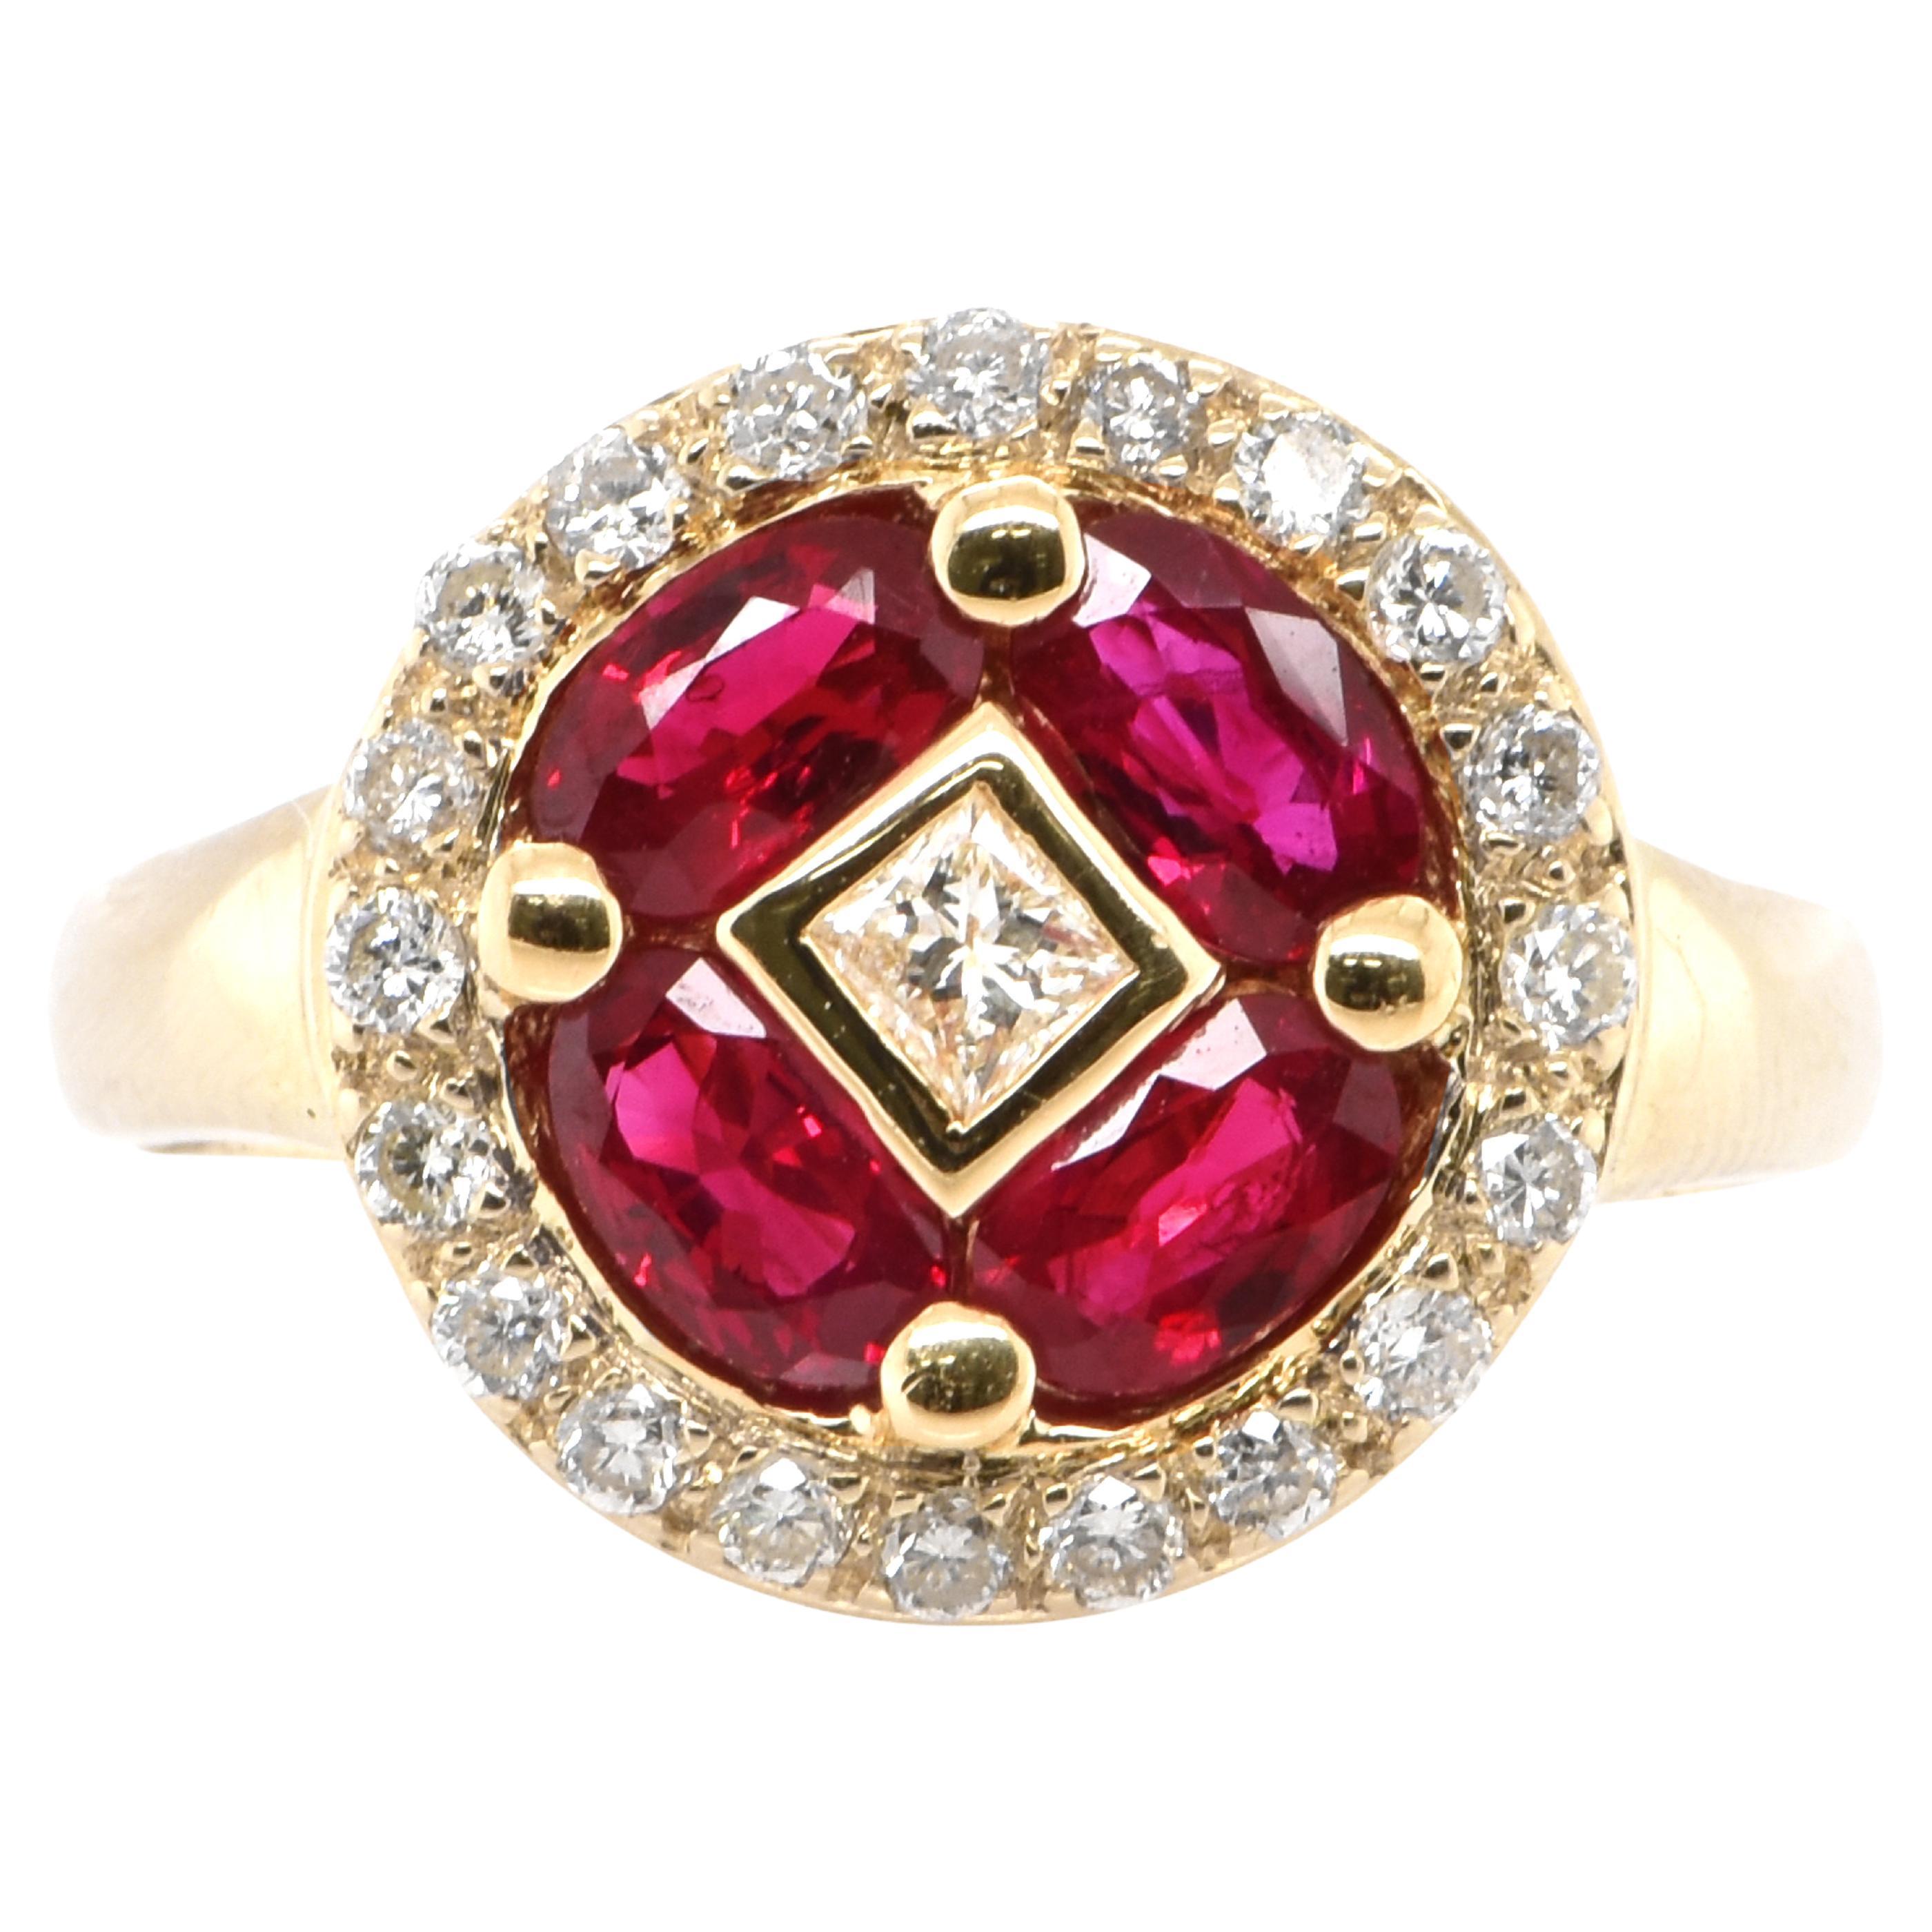 1.34 Carat Natural Vivid Red Ruby and Diamond Cluster Ring set in 18K Gold